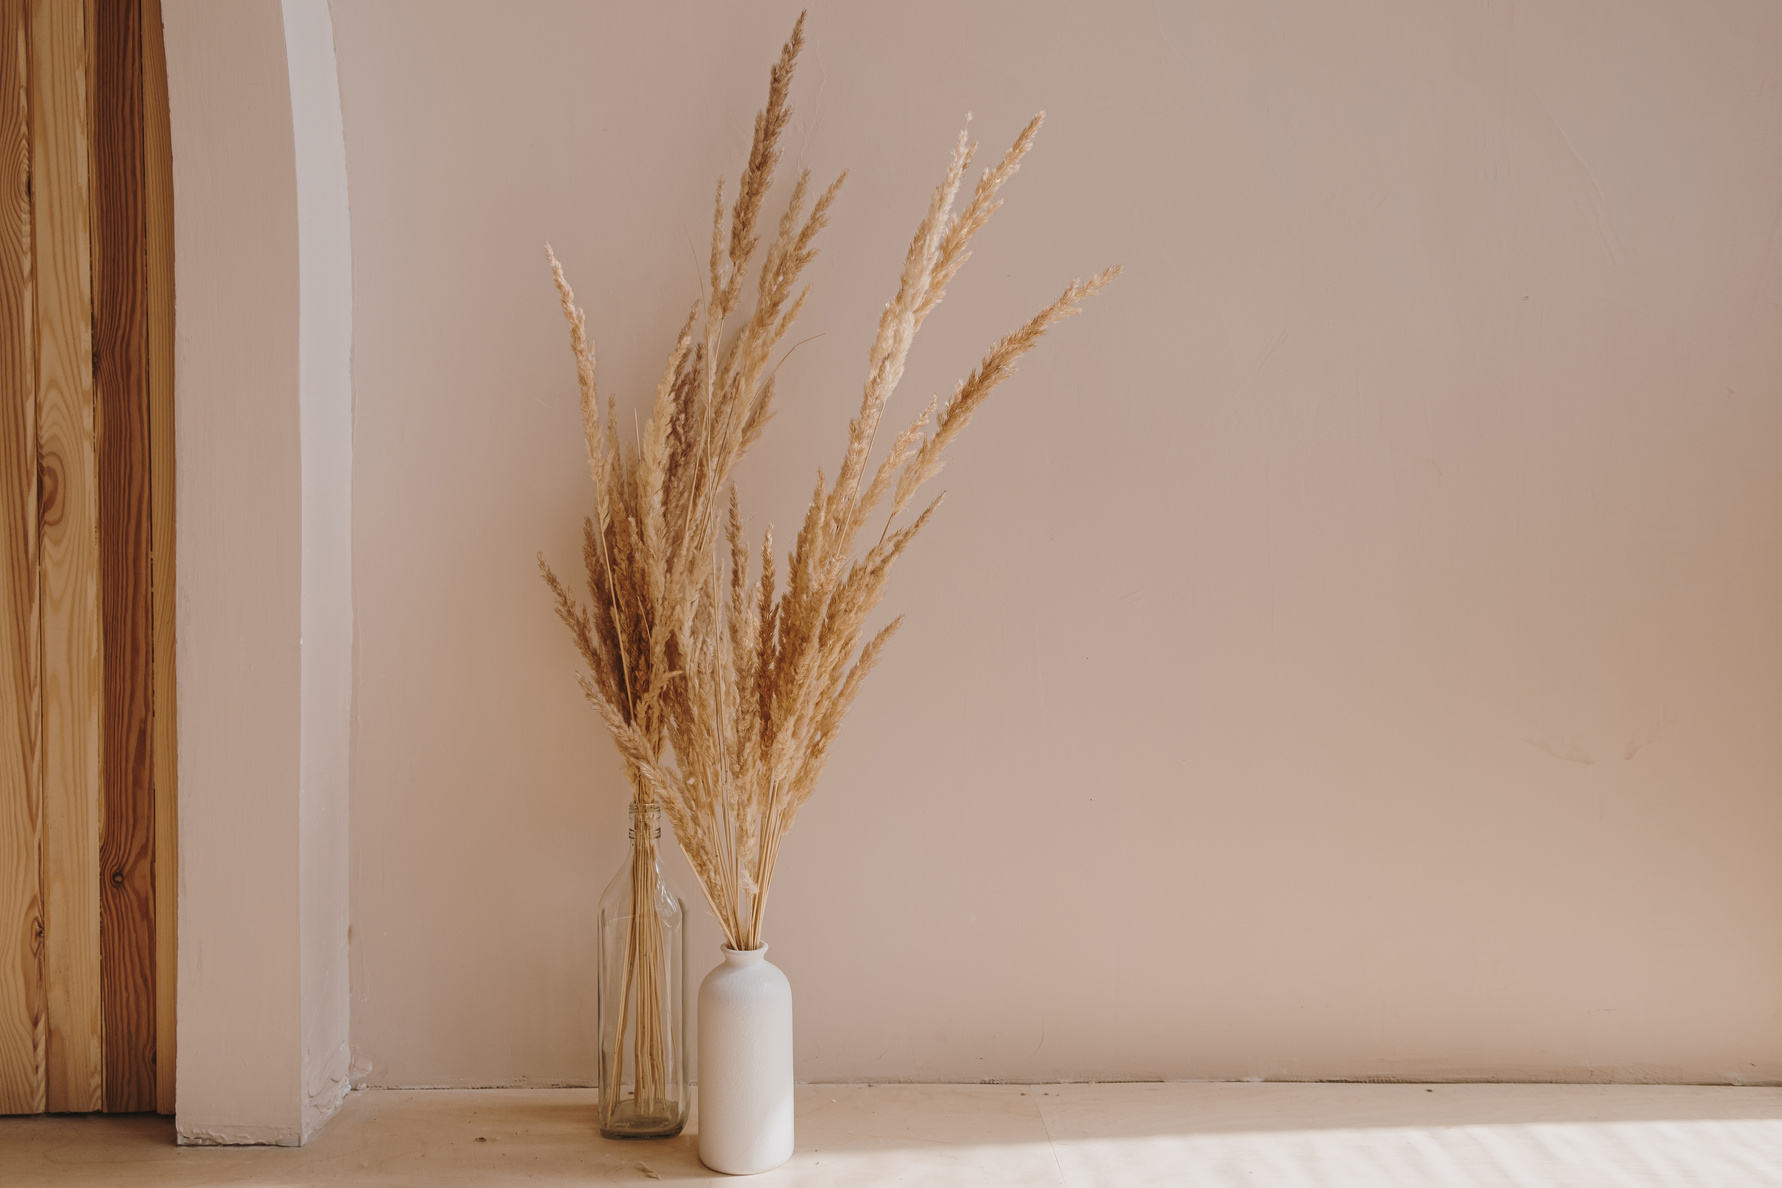 Vases with Pampas Grass against the Wall